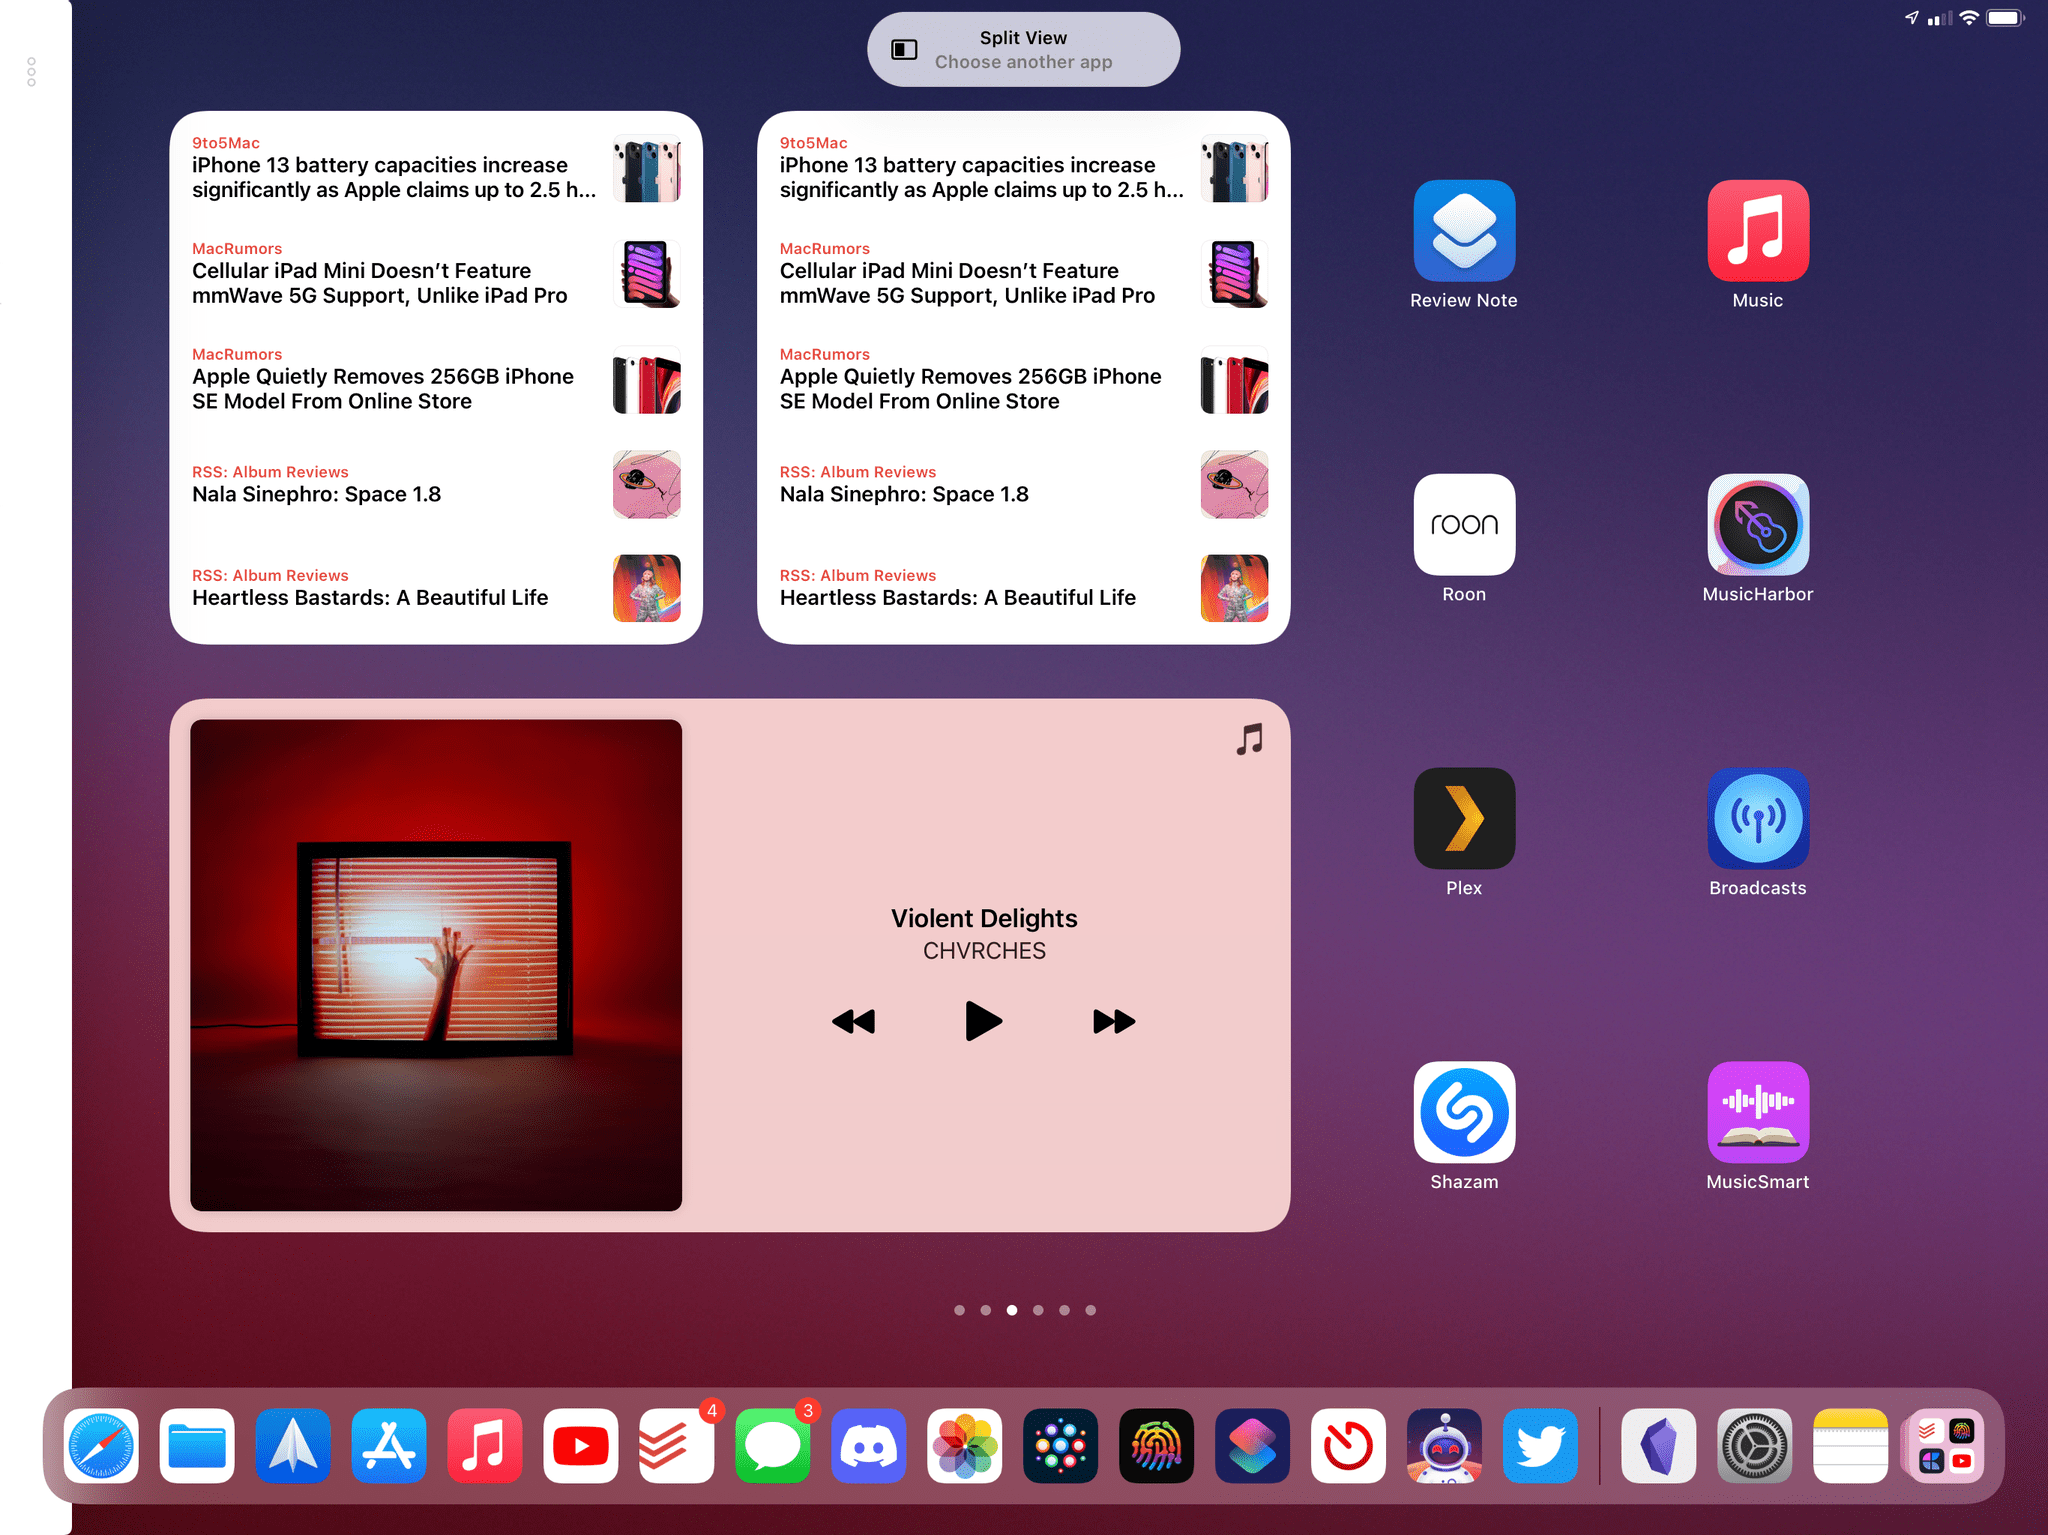 When you tile a window to one side of the screen, iPadOS suggests what you can do to create a Split View.